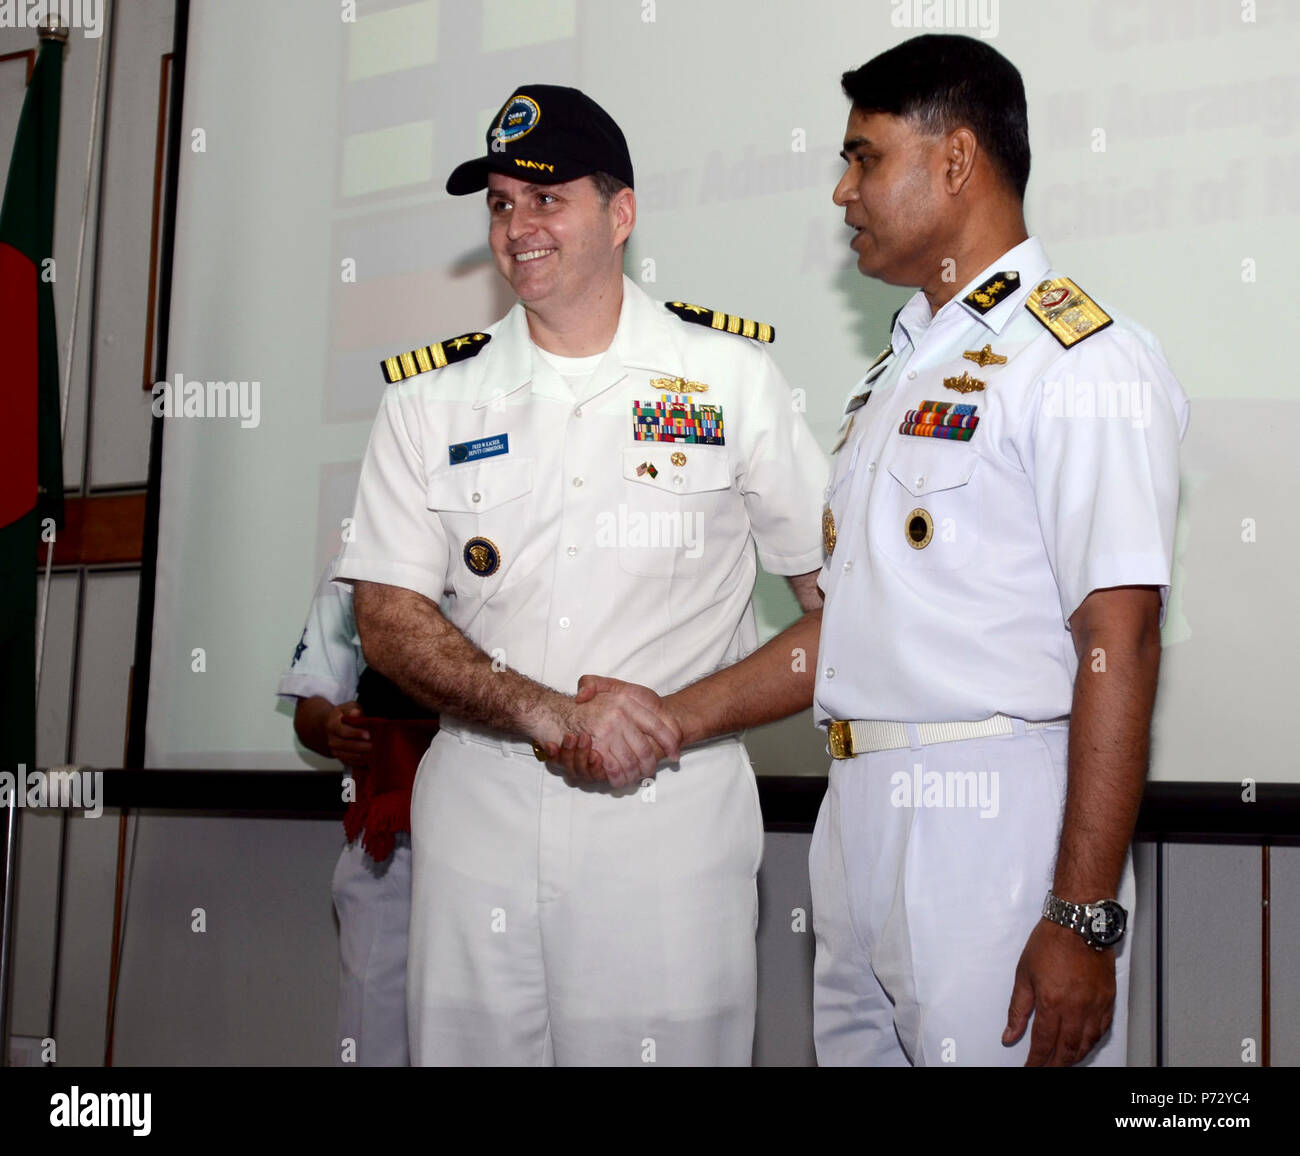 Bangladesh (Sept. 21, 2013) - Capt. Fred Kacher, deputy commander, Destroyer Squadron (DESRON) 7, shakes hands with Rear Adm. Aurangzeb Chowdury, assistant chief of Naval Staffs, during the closing ceremony of Cooperation Afloat Readiness and Training (CARAT) Bangladesh 2013.  U.S. Navy units participating in CARAT Bangladesh include the DESRON 7 staff, members from Maritime Civil Affairs and Security Training Command (MCAST), members from Afloat Training Group, Western Pacific and the diving and salvage vessel USNS Safeguard (T-ARS 50) with embarked Mobile Diving and Salvage Unit (MDSU) 1. CA Stock Photo